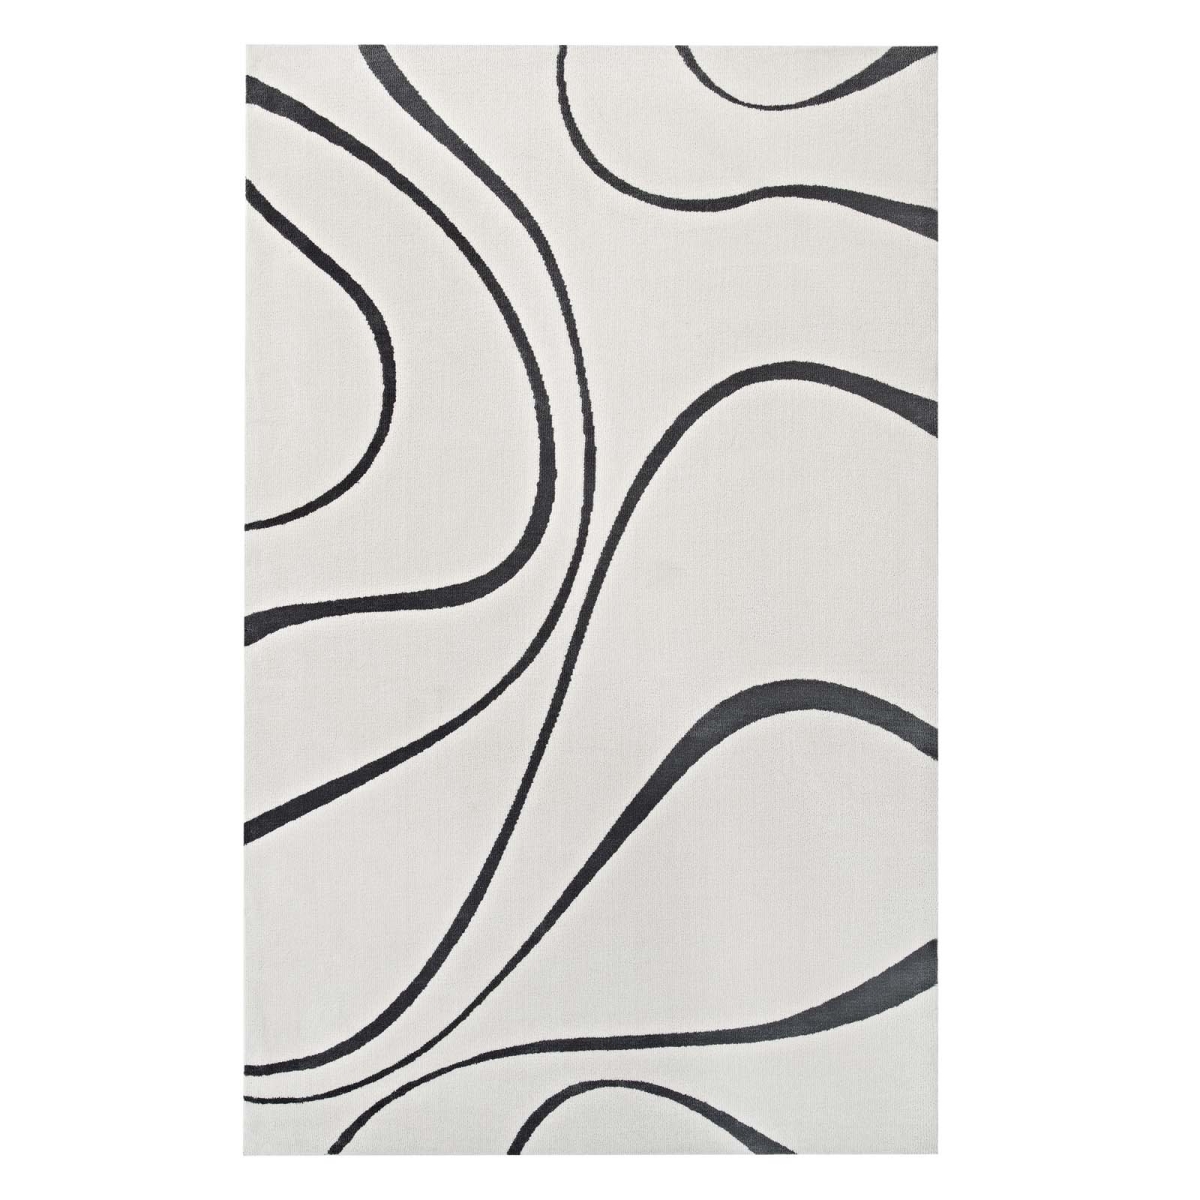 R-1002d-810 8 X 10 Ft. Therese Abstract Swirl Polyester Area Rug - Ivory & Charcoal, 0.5 X 96 X 120 In.